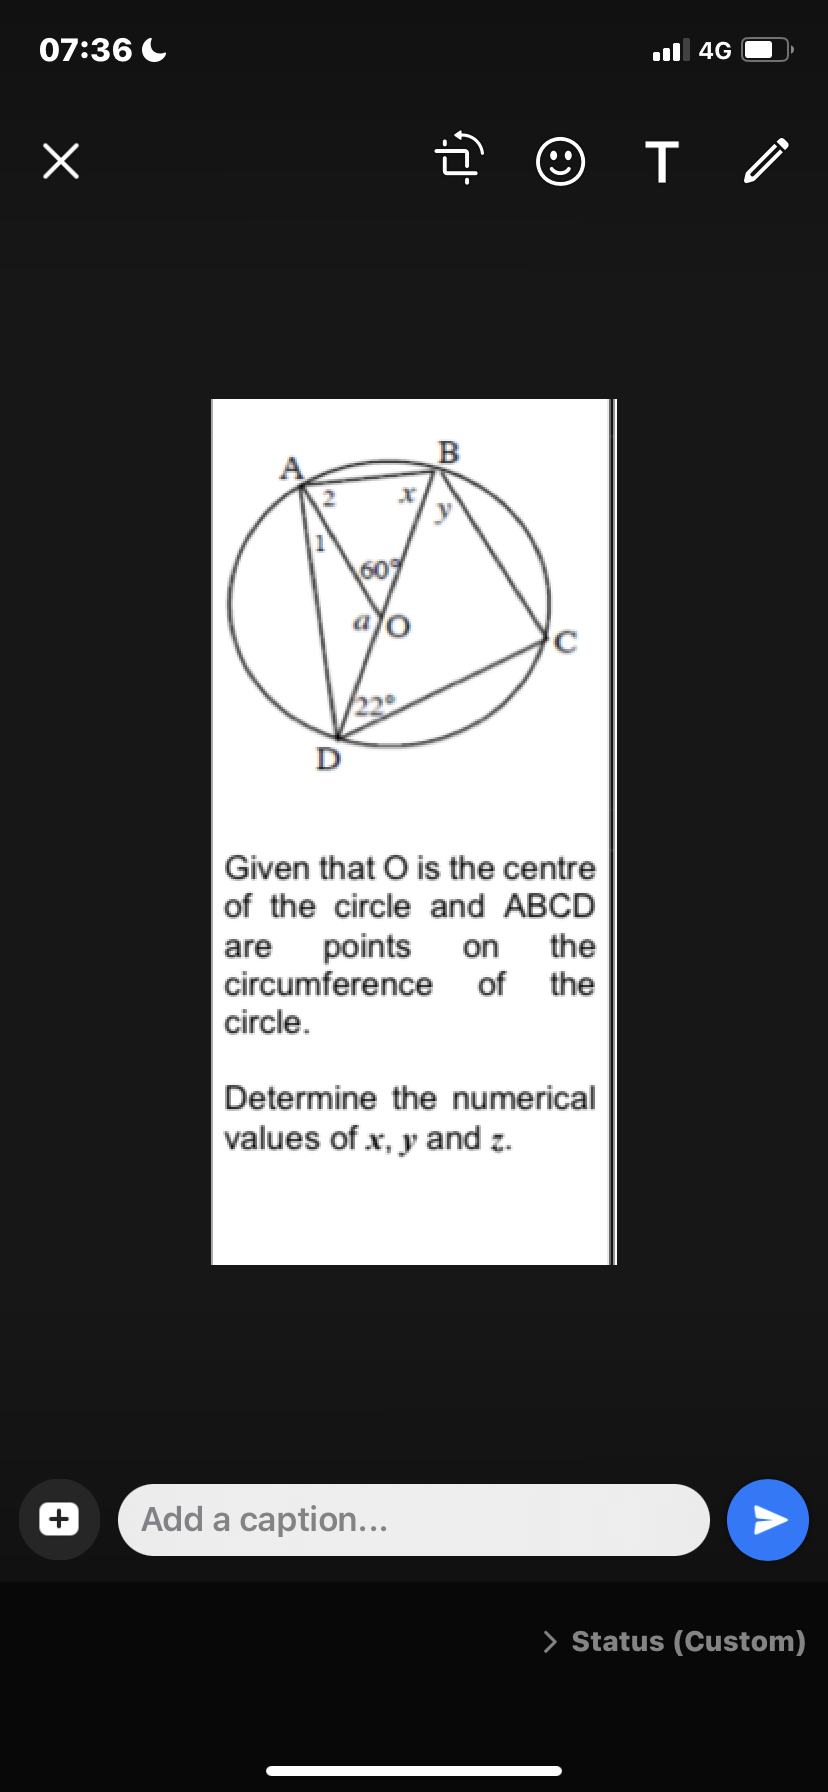 07:36
X
fj
•
Given that O is the centre
of the circle and ABCD
are
points on the
circumference of the
circle.
Determine the numerical
values of x, y and z.
Add a caption...
T
4G
Ò
> Status (Custom)